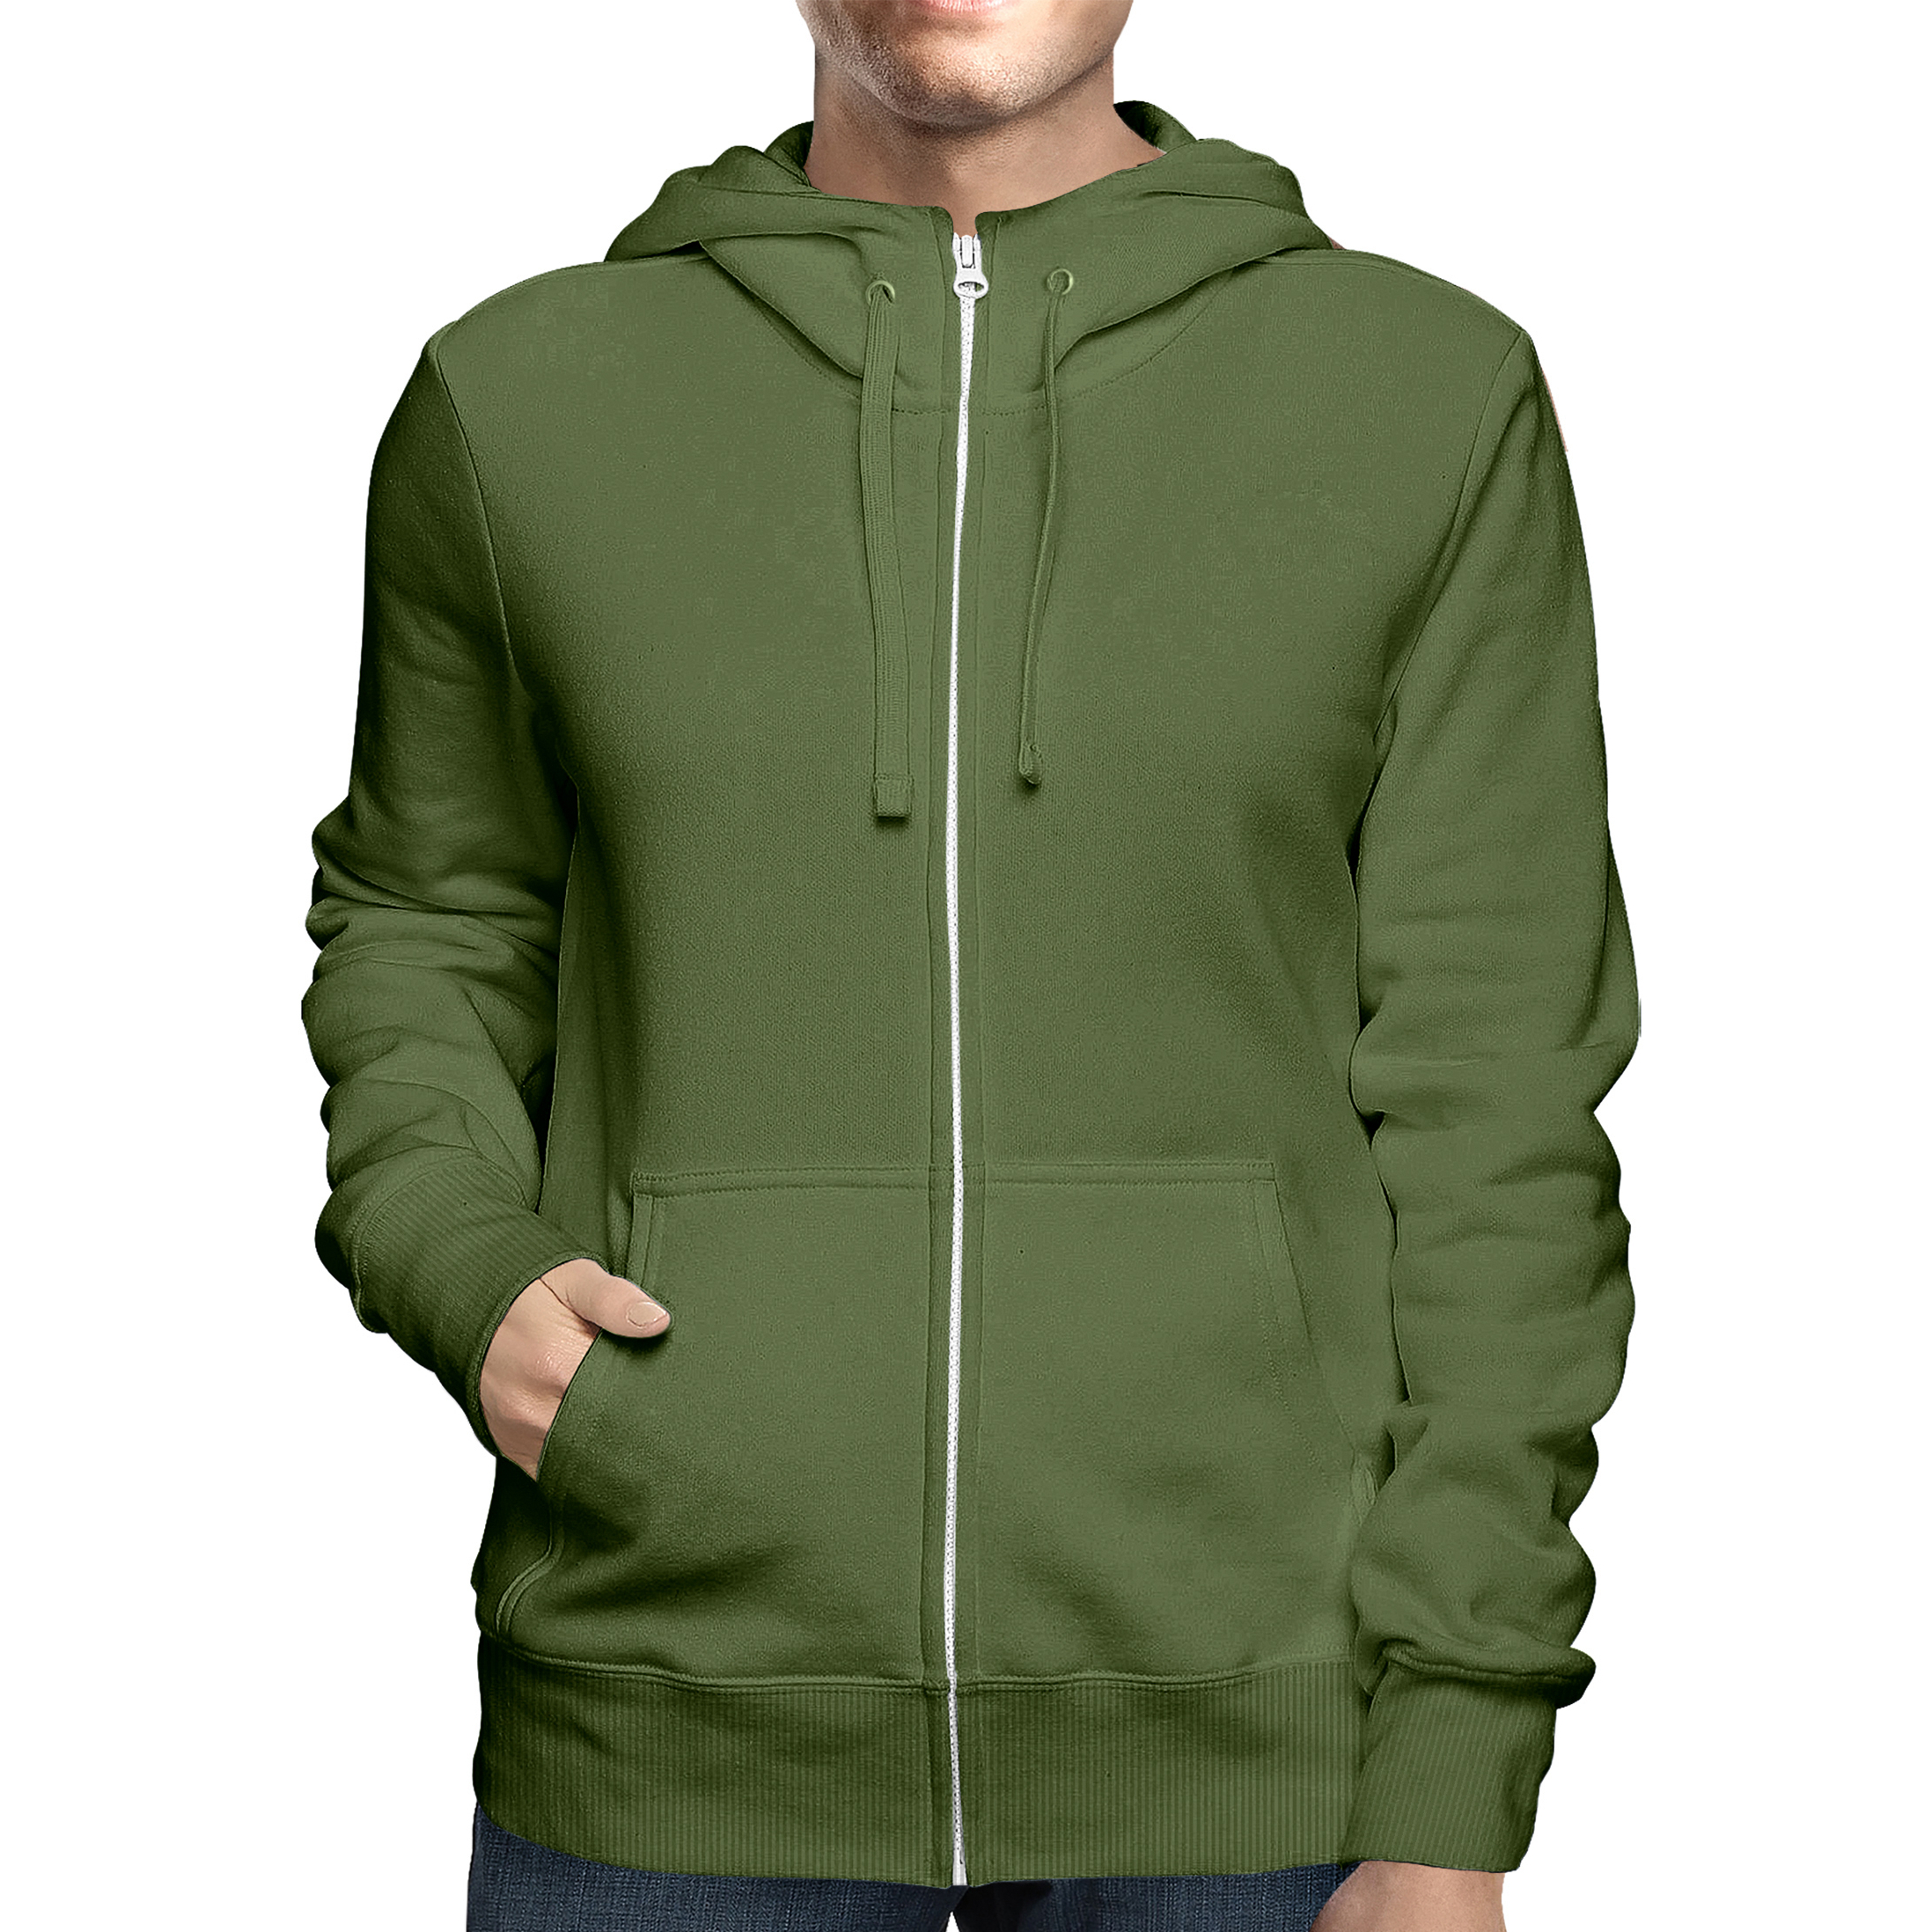 2-Pack: Men's Full Zip Up Fleece-Lined Hoodie Sweatshirt (Big & Tall Size Available) - Olive, X-large